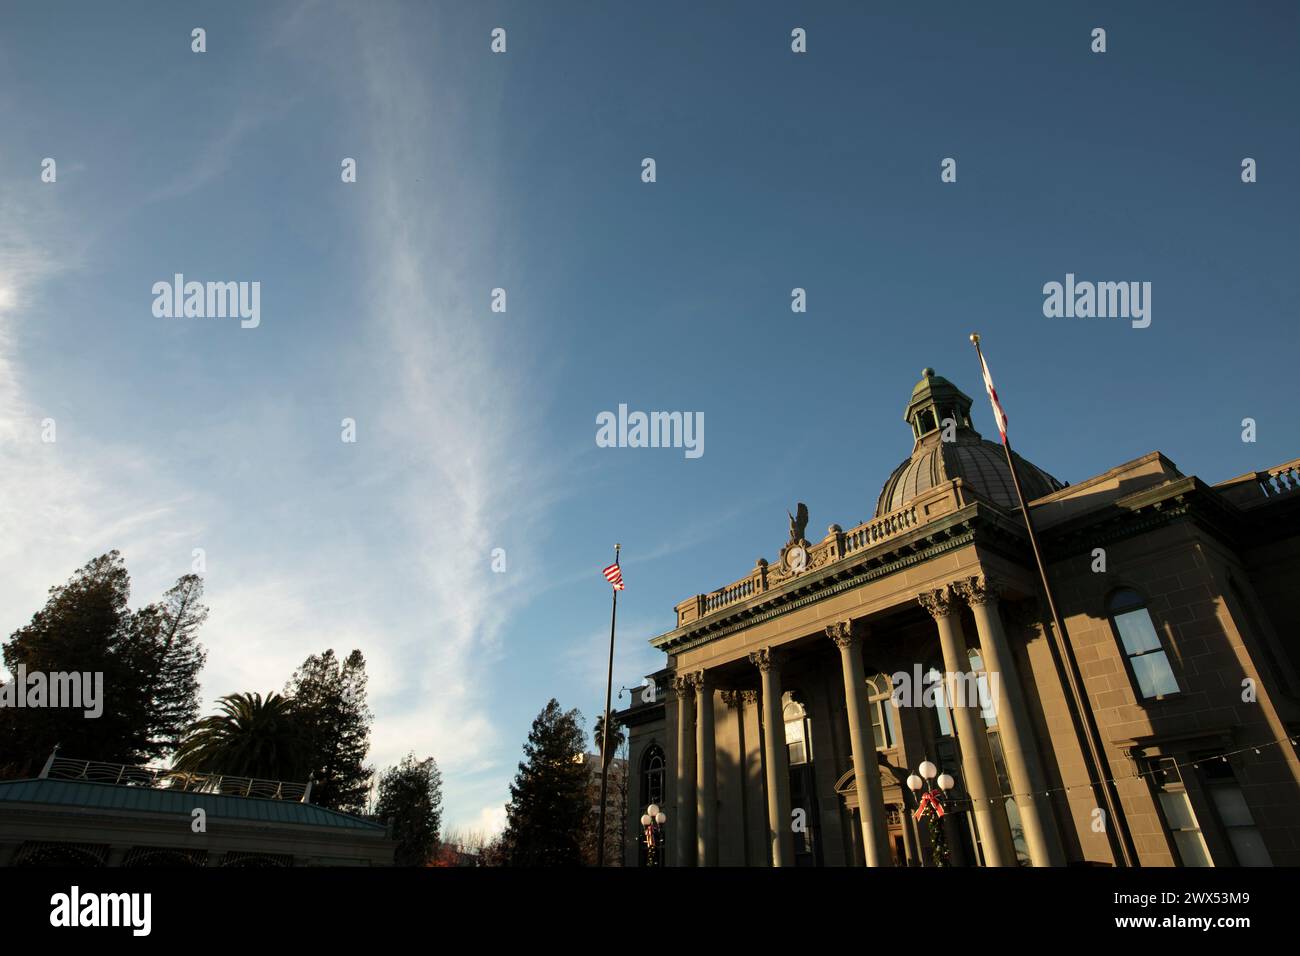 Sunset view of the historic San Mateo County Courthouse in downtown Redwood City, California, USA. Stock Photo